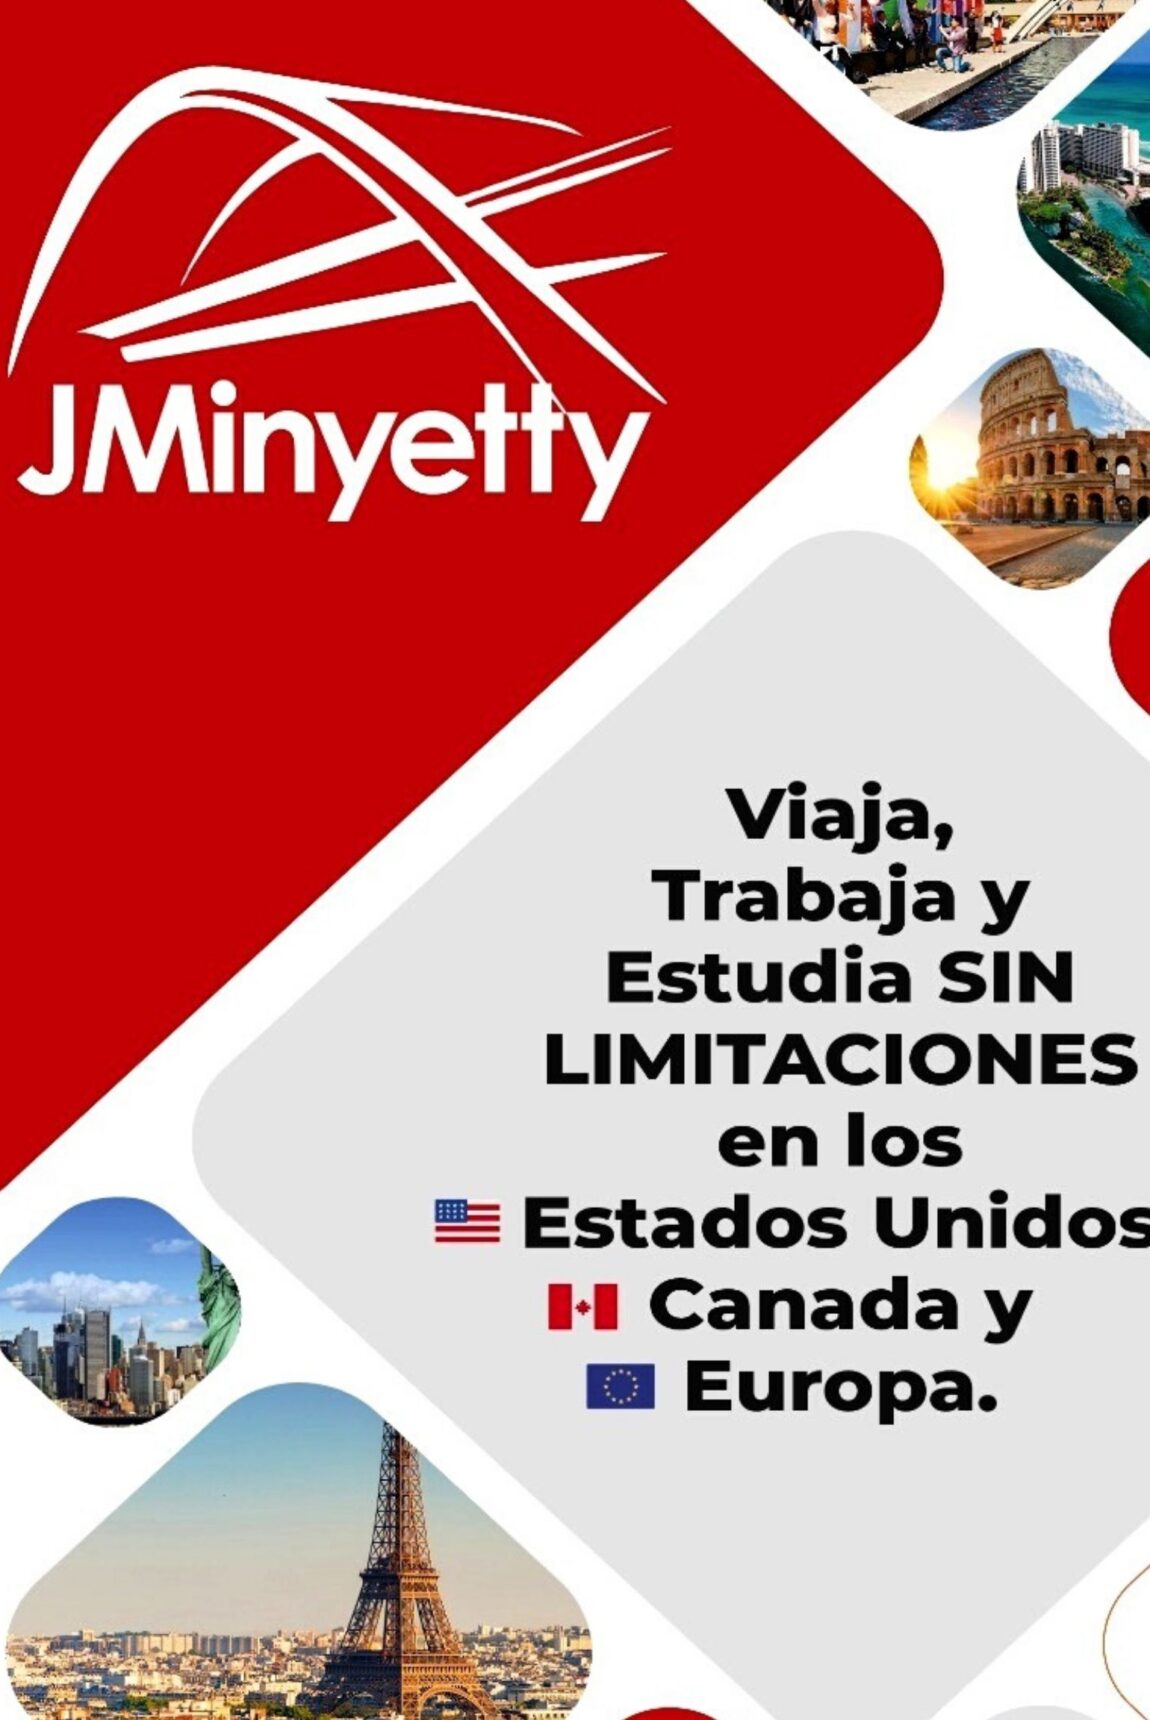 Jminyetty Travel and Consulting S.R.L